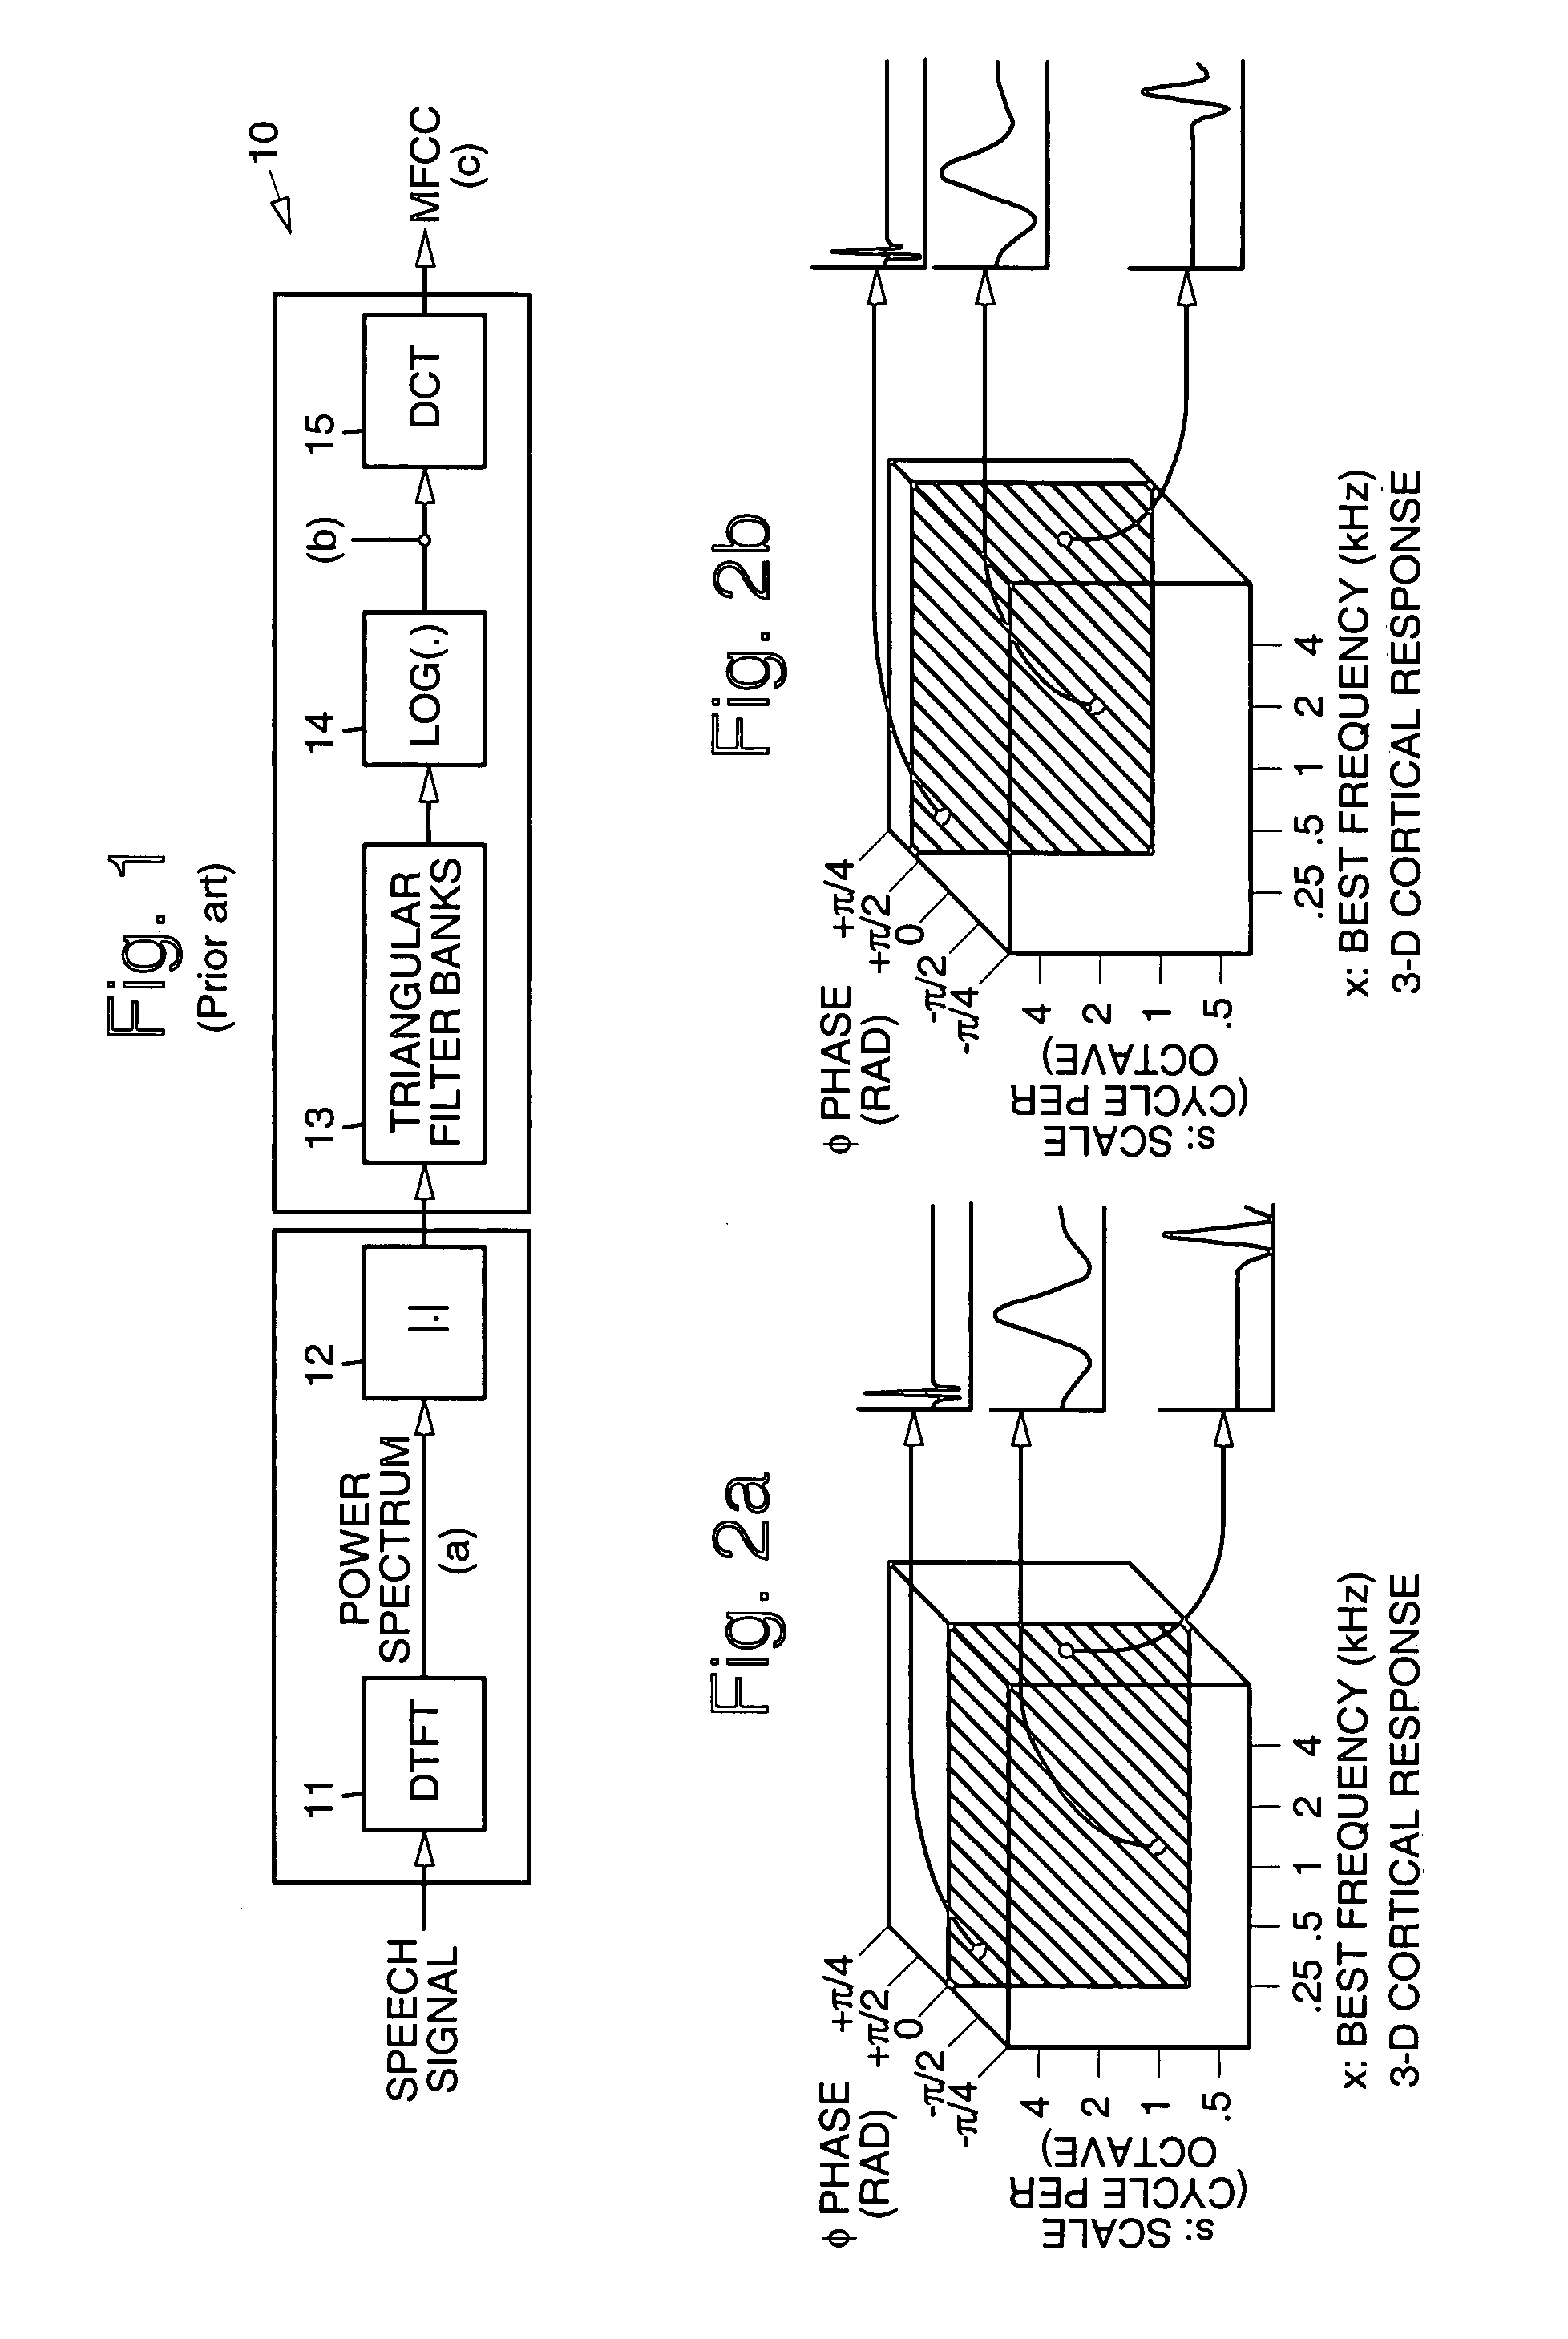 Automatic pattern recognition using category dependent feature selection